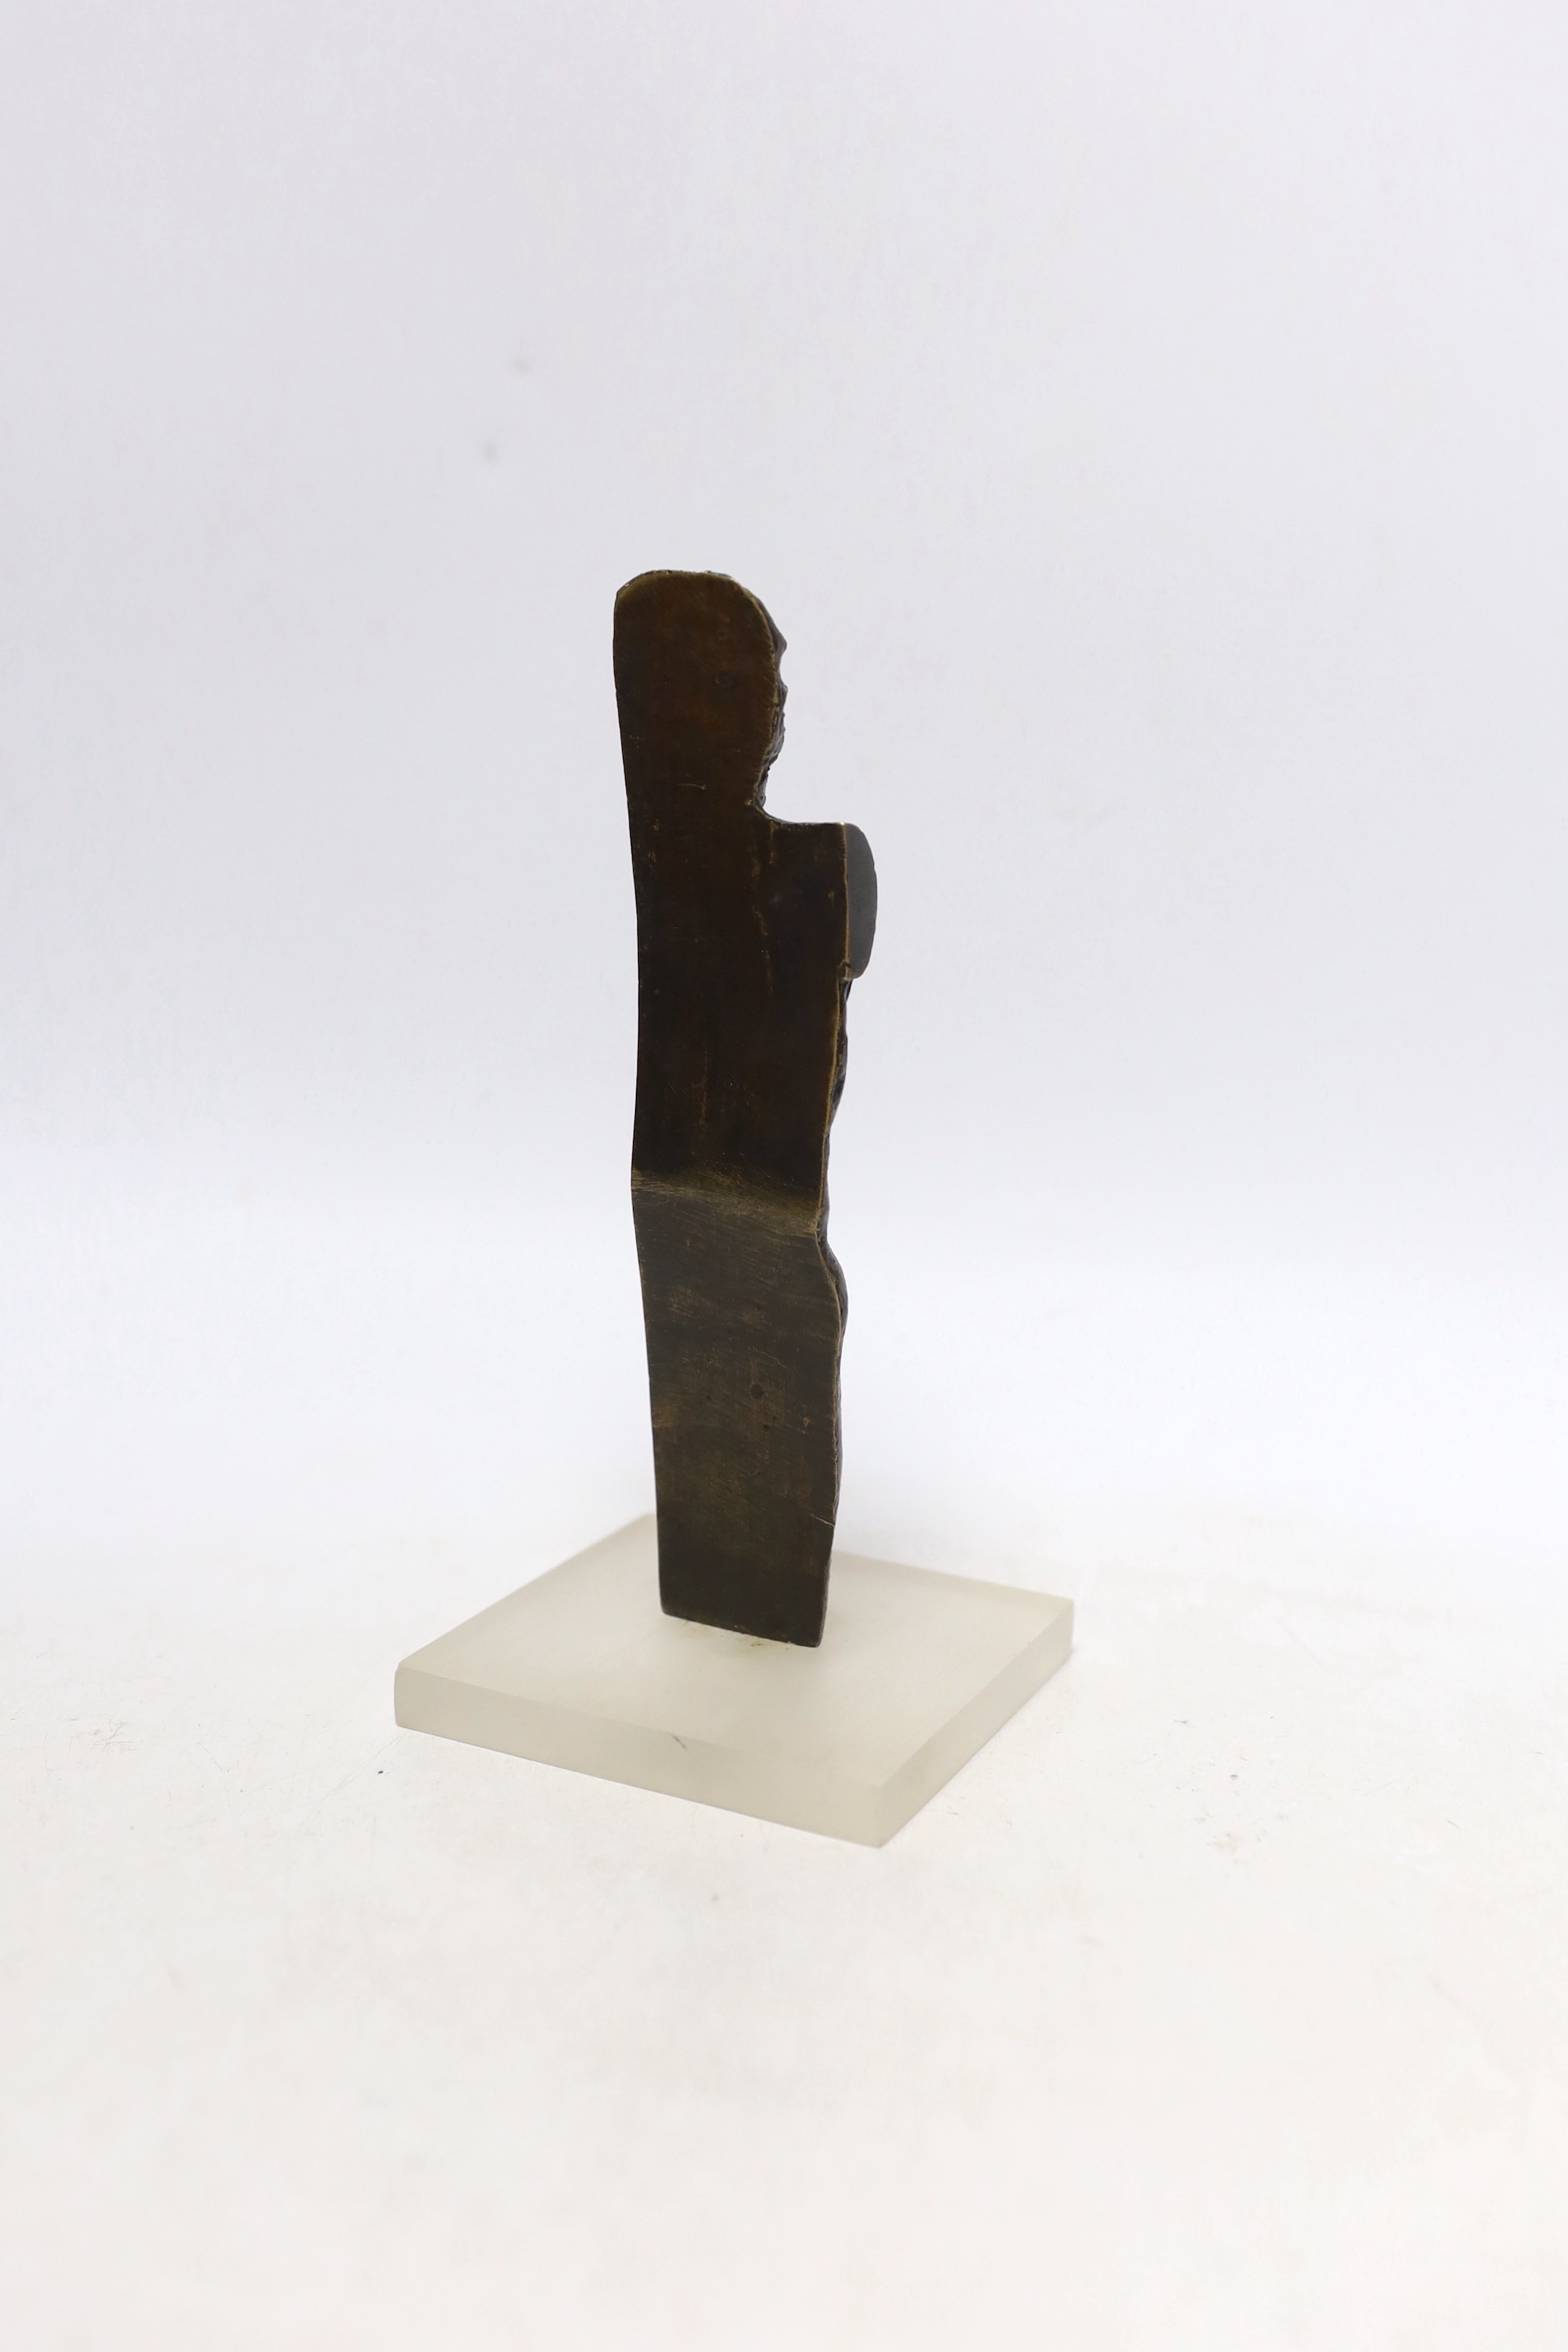 Victor Salmones (1937-1989), bronze small nude, marked to side ‘A-39-V-SALMONES S/N’, 19cm